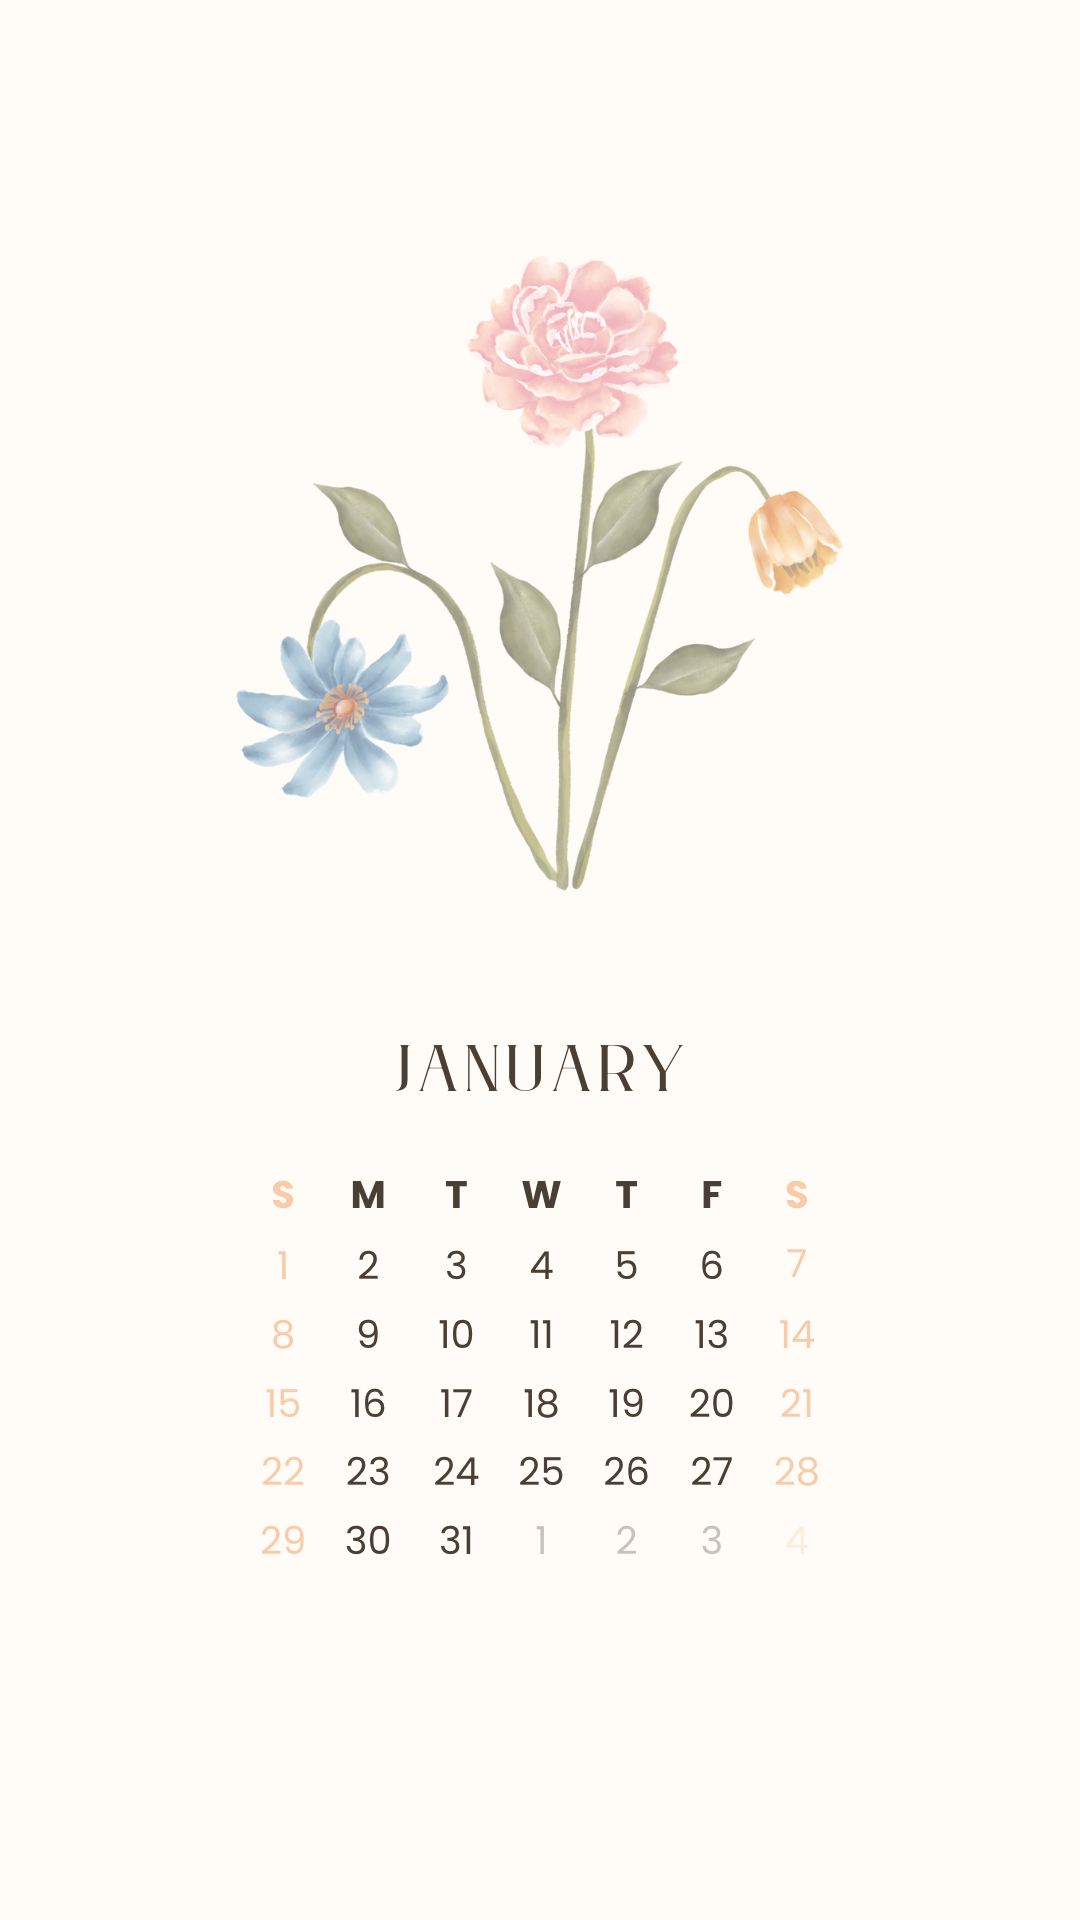 January 2023 free aesthetic calendar wallpaper / lock screen background for your phone ⋆ The Aesthetic Shop